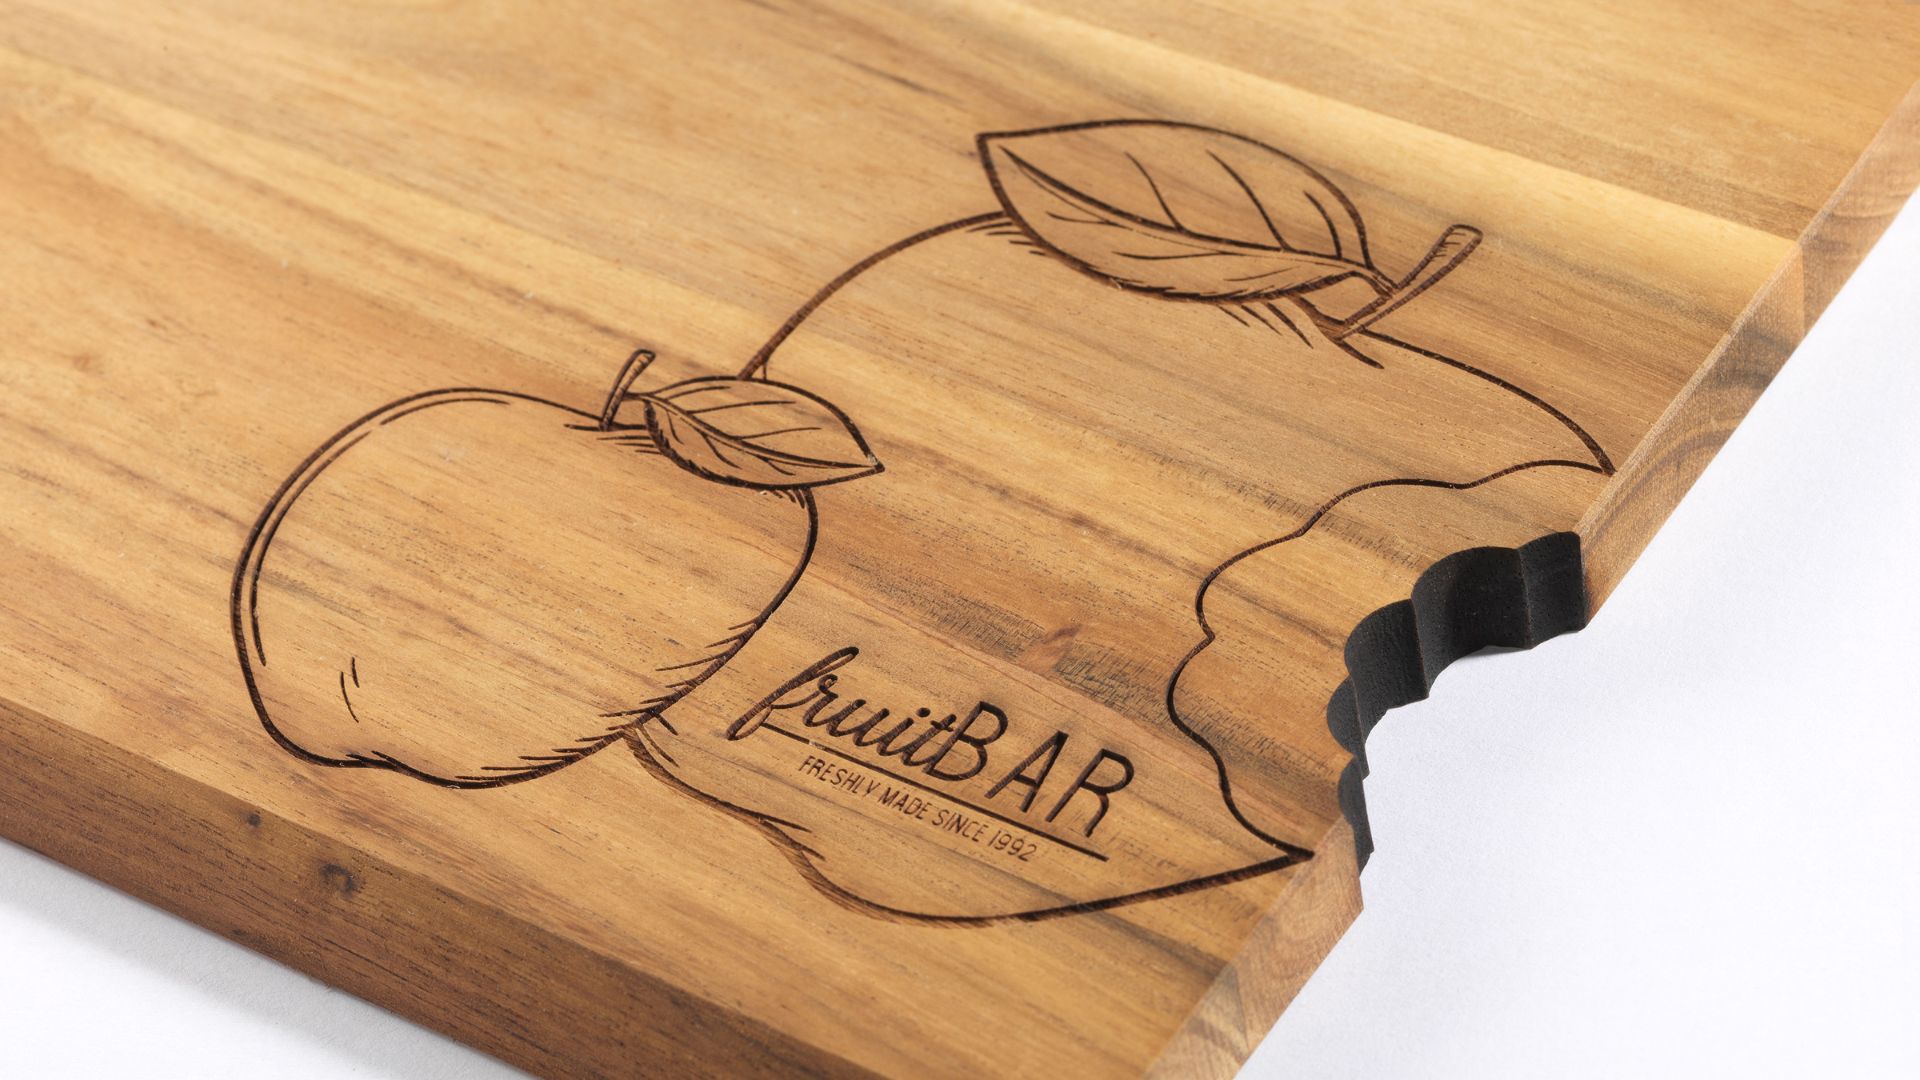 What Wood Can Be Used With A Laser Engraver